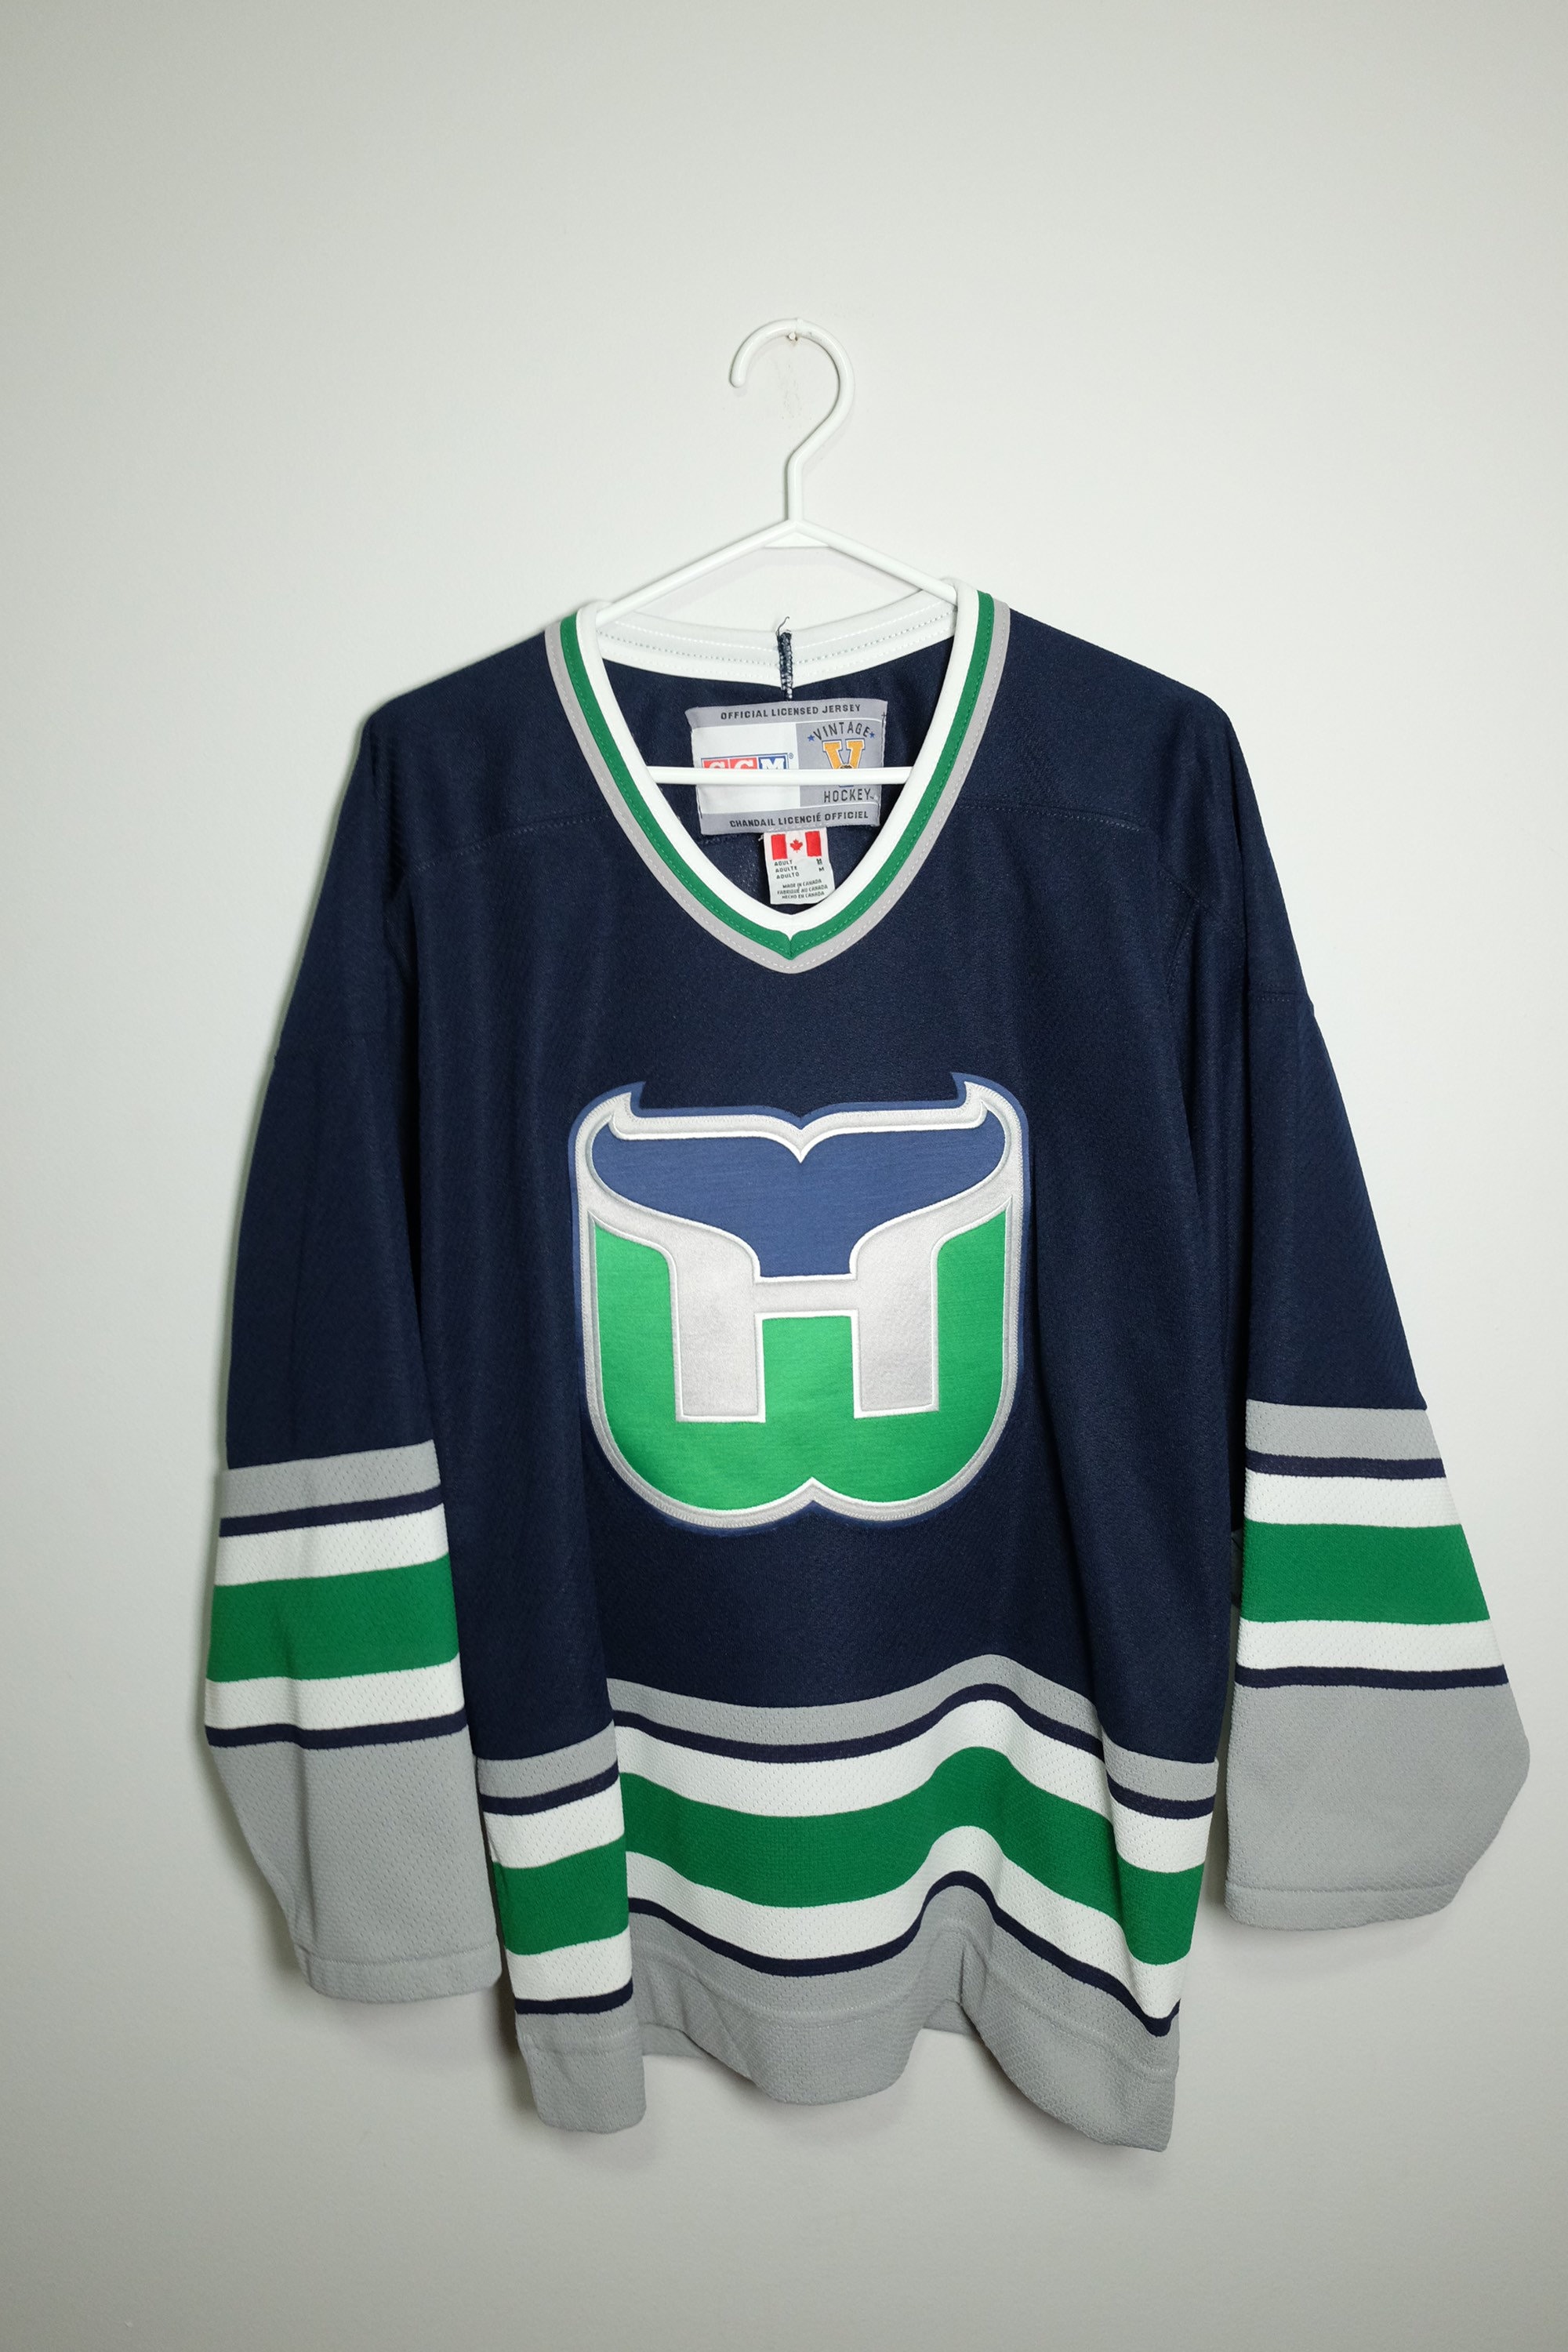 New England Whalers WHA white vintage hockey jersey